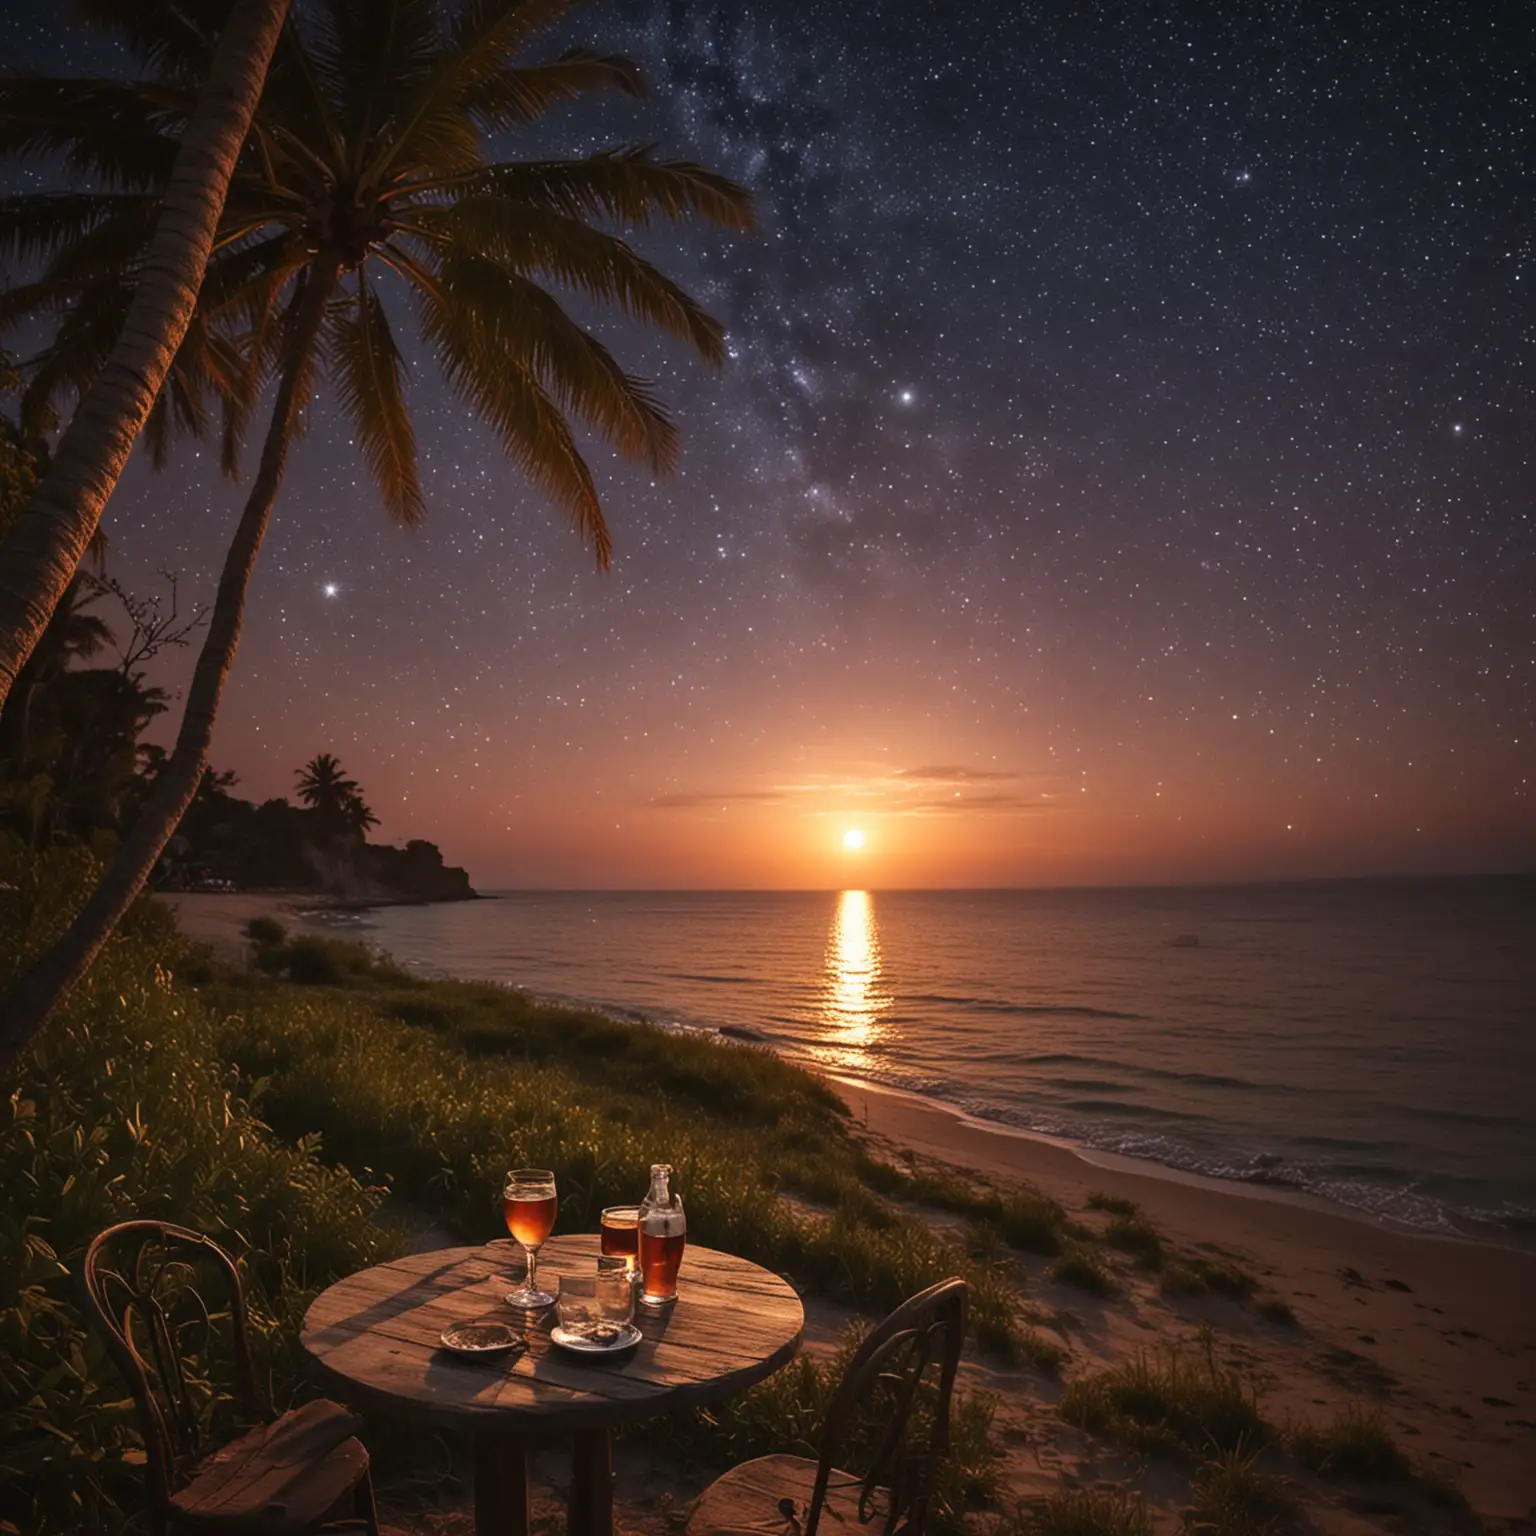 Twilight Serenade Evening Paradise with Starlit Skies and Drinks